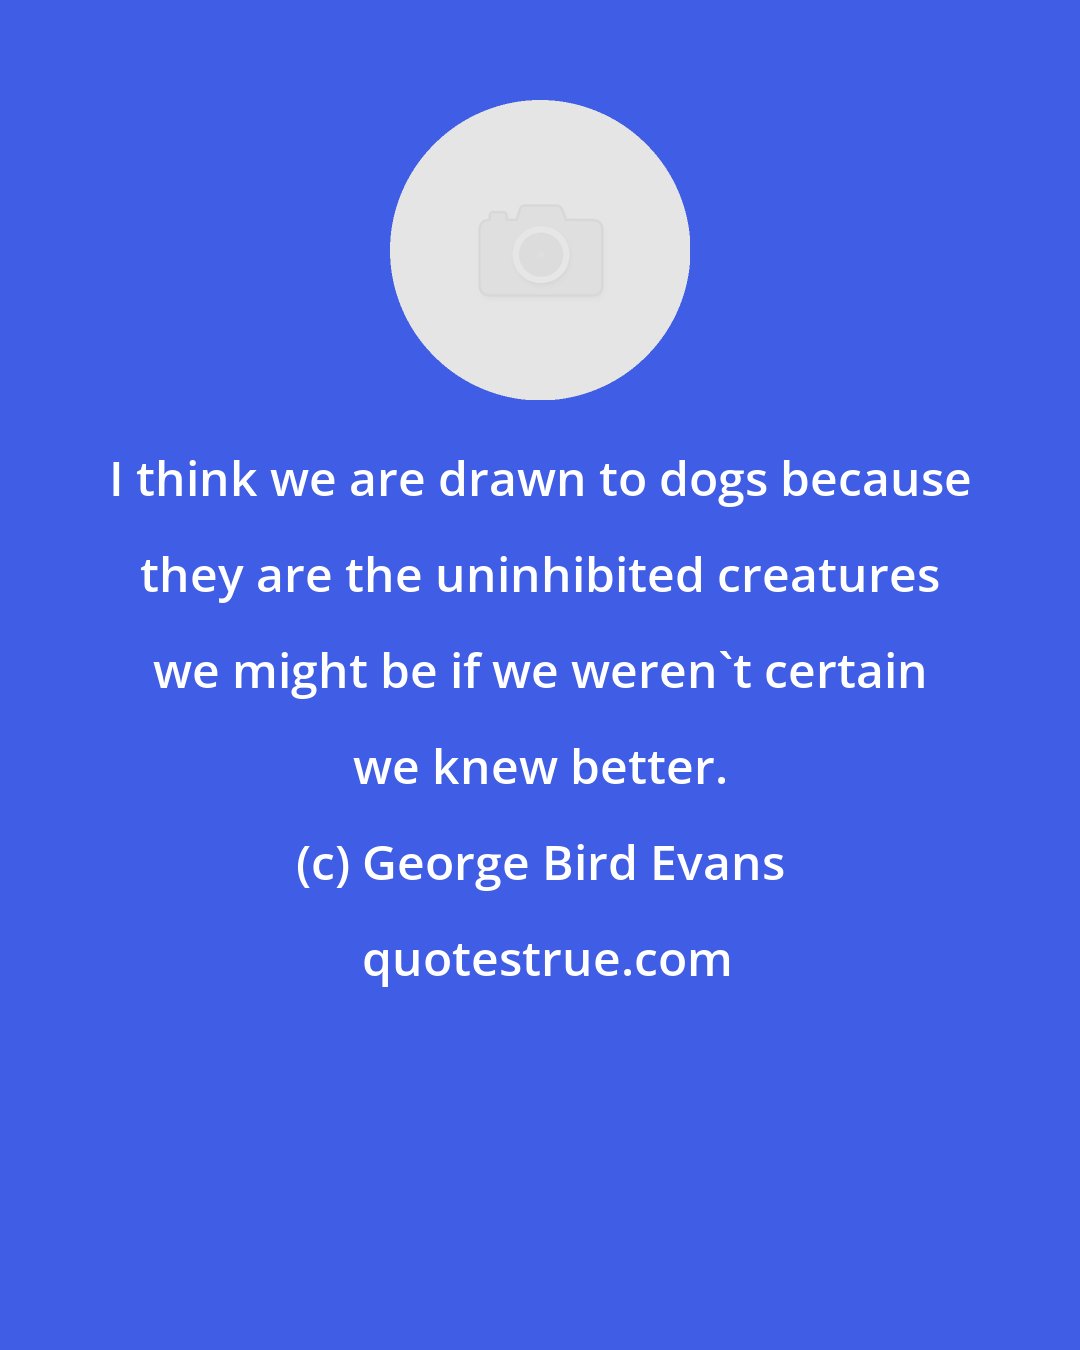 George Bird Evans: I think we are drawn to dogs because they are the uninhibited creatures we might be if we weren't certain we knew better.